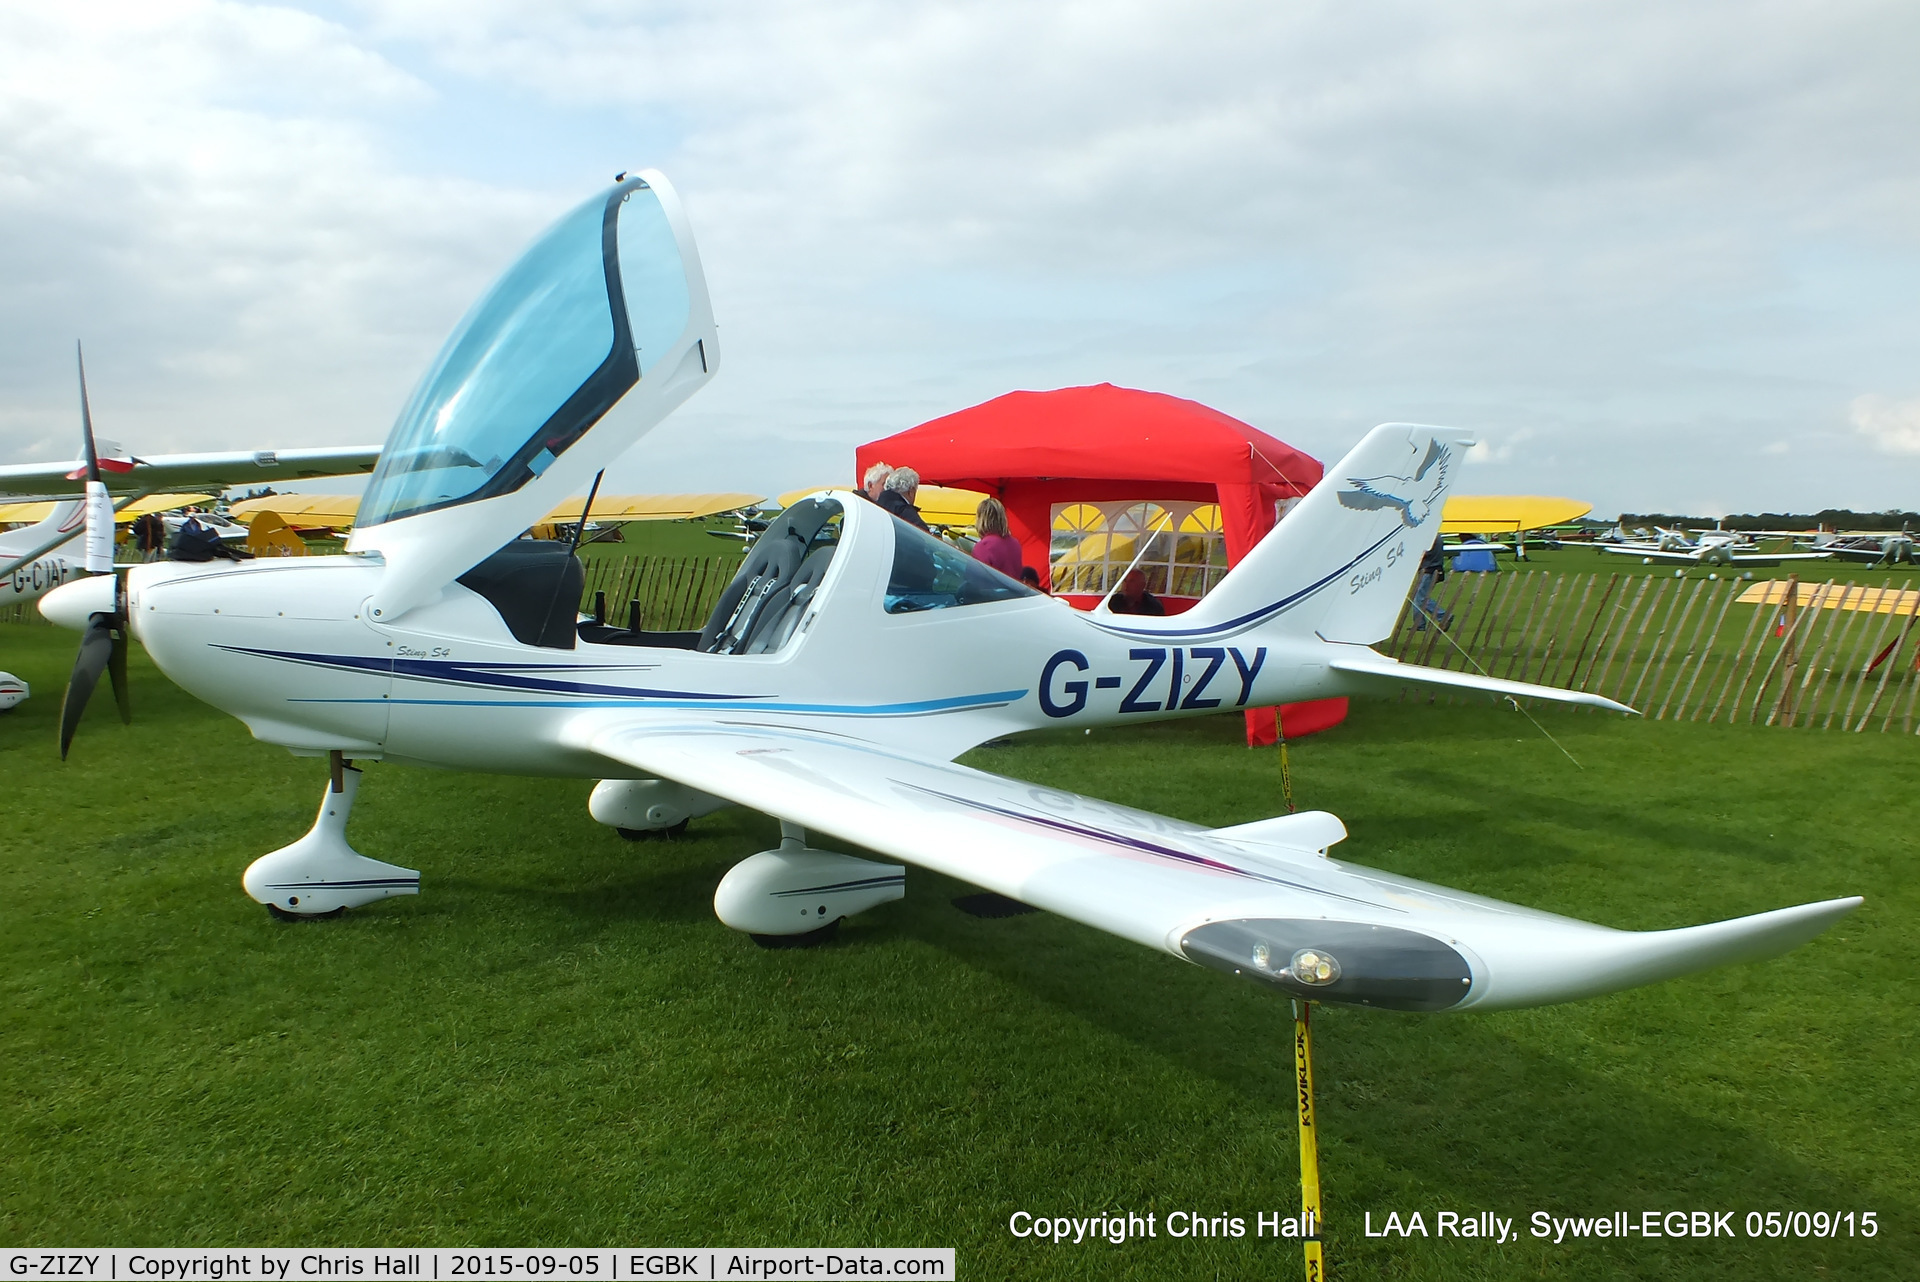 G-ZIZY, 2013 TL Ultralight TL-2000 Sting S4 C/N LAA 347A-15201, at the LAA Rally 2015, Sywell